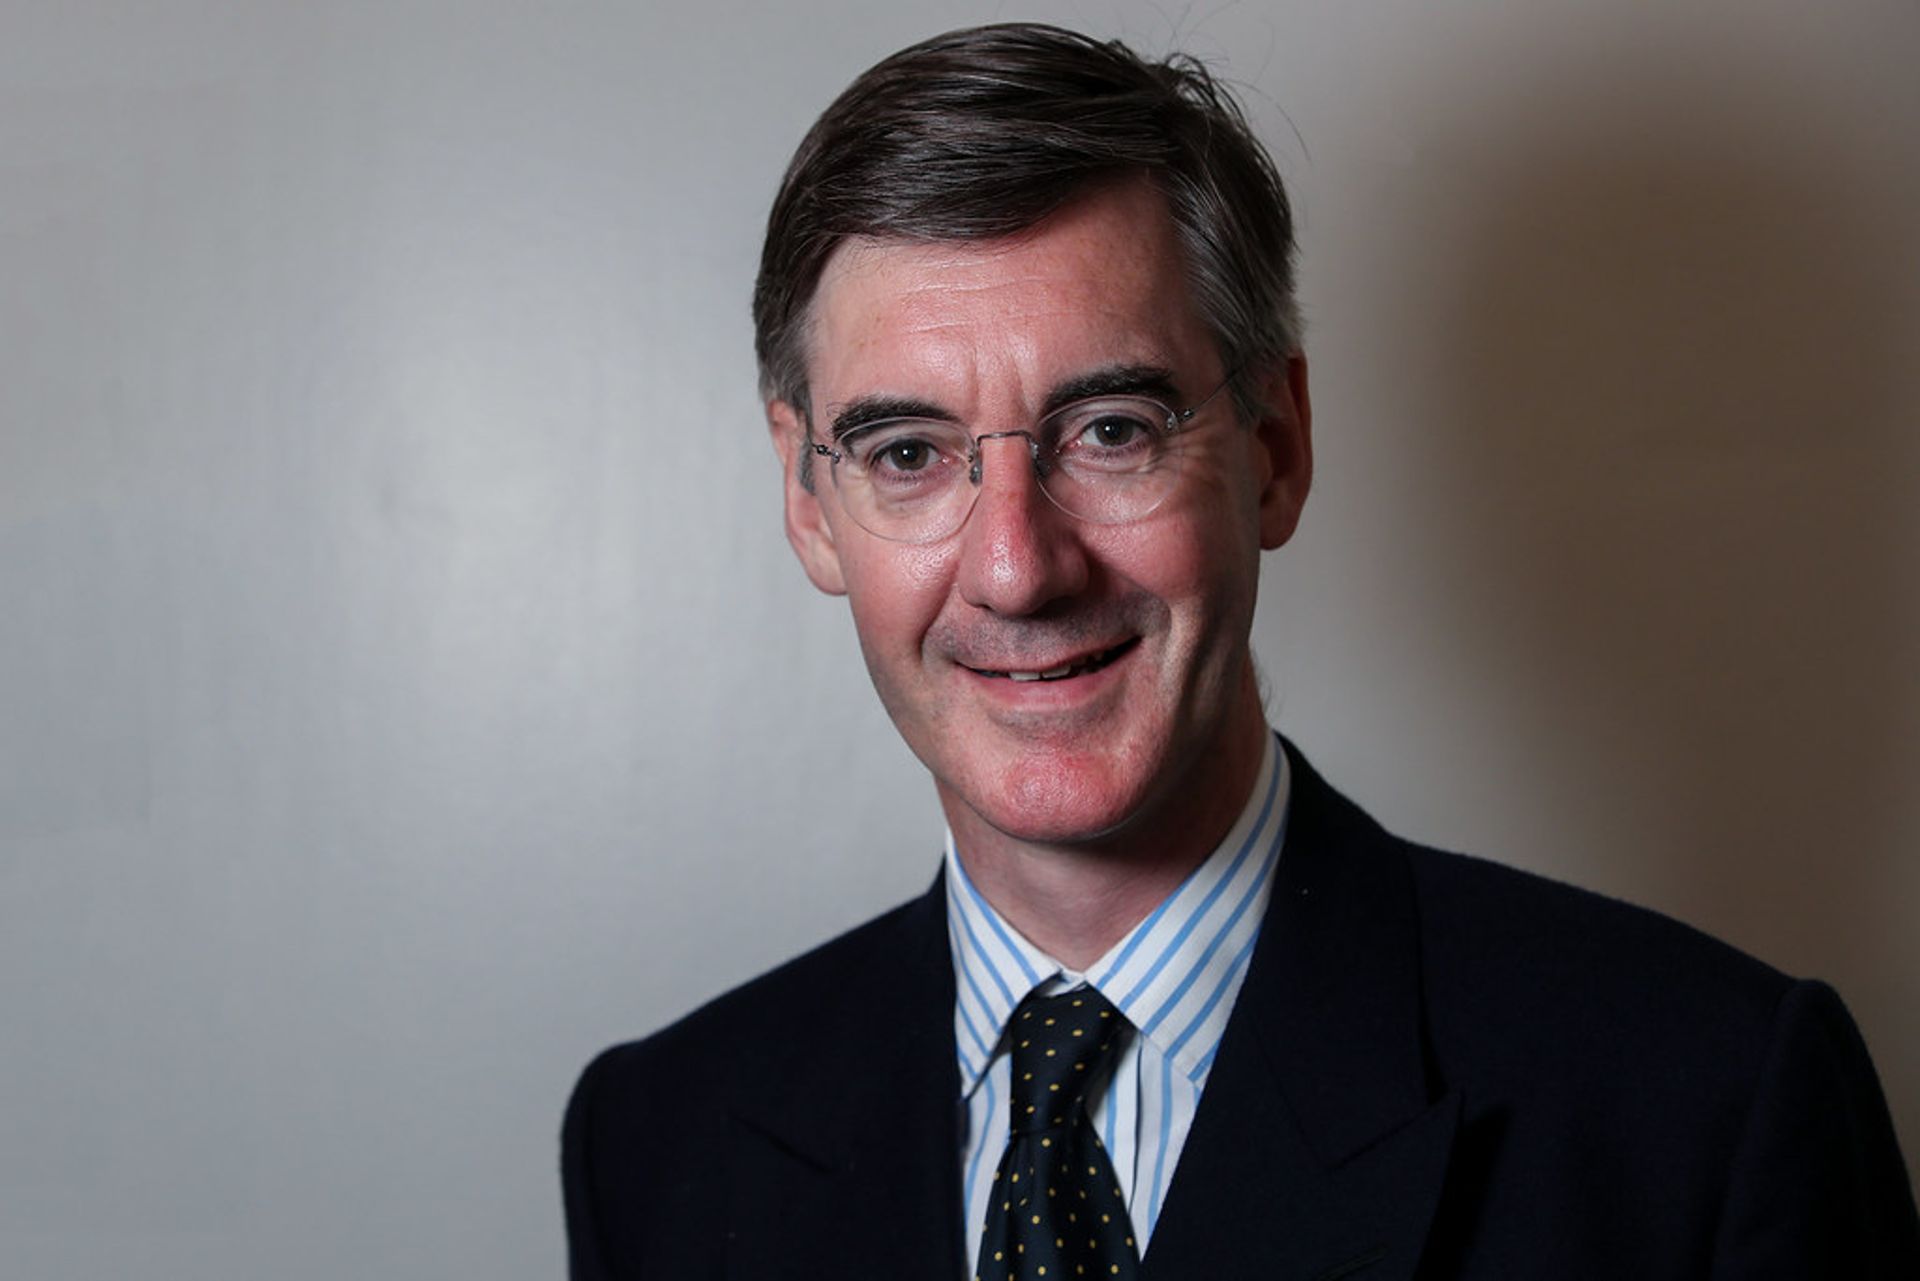 Jacob Rees-Mogg MP, Minister of State for Brexit Opportunities and Government Efficiency. 